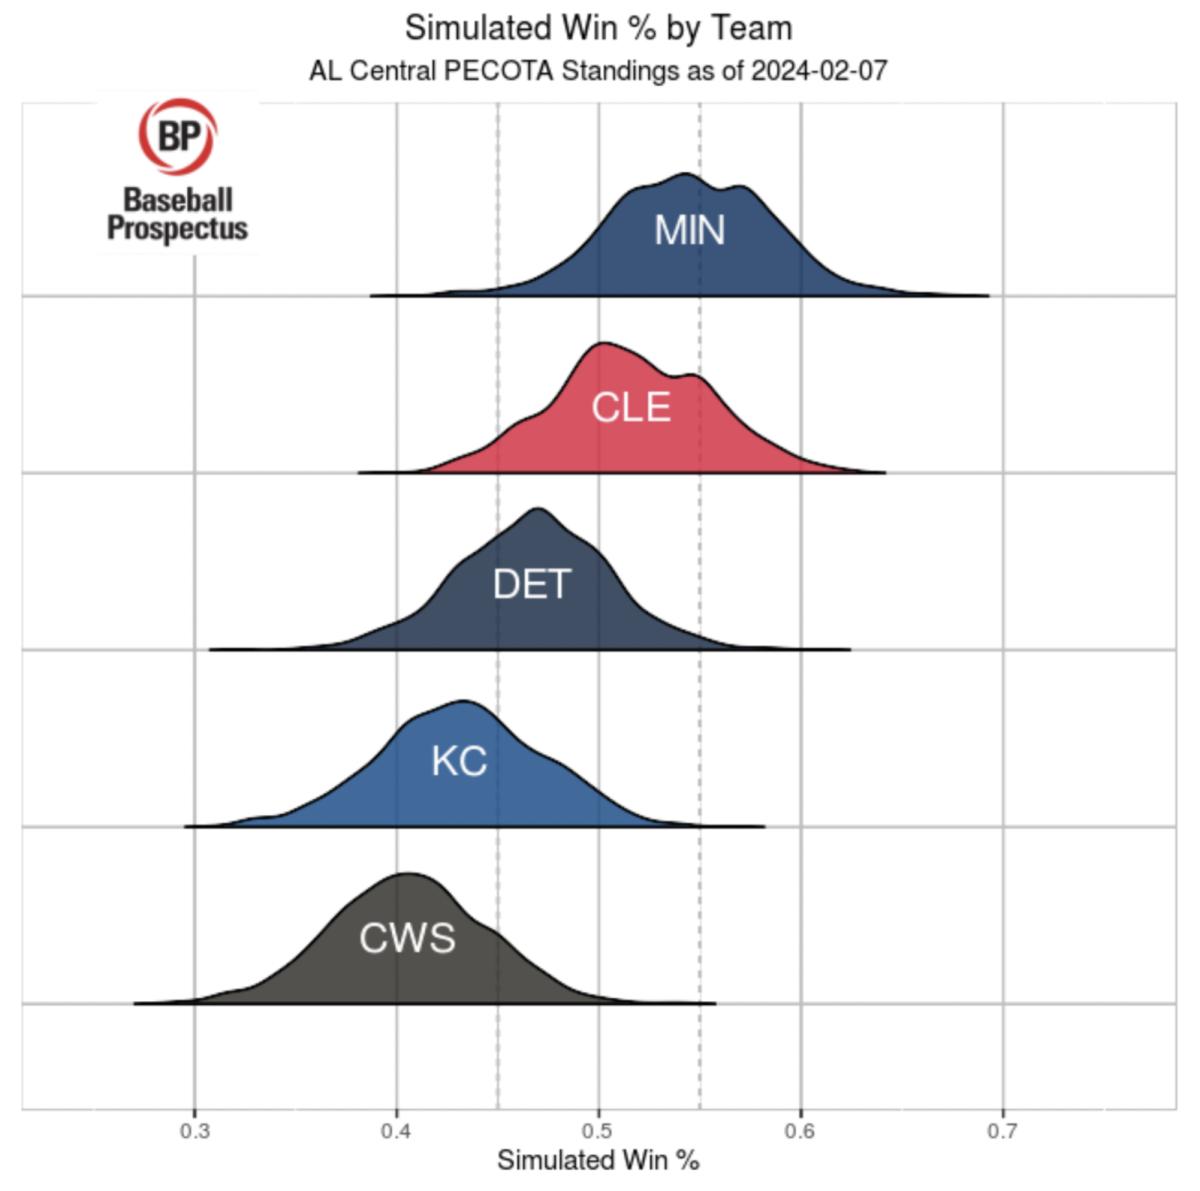 The range of winning percentages for teams in the AL Central, according to PECOTA.